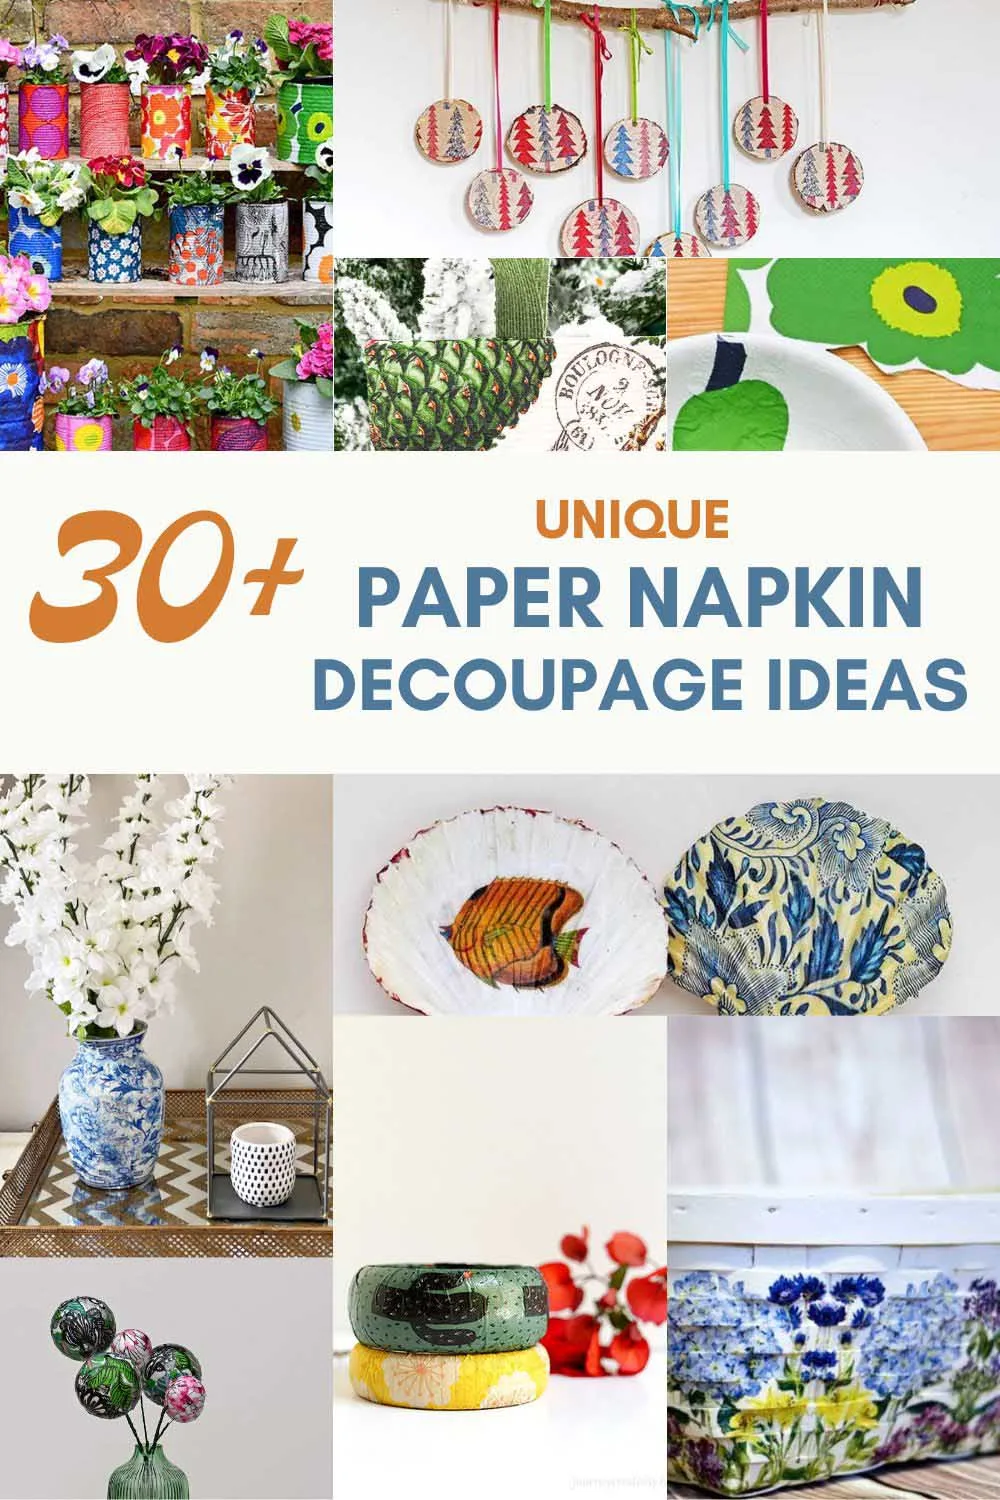 Types of Decoupage Paper